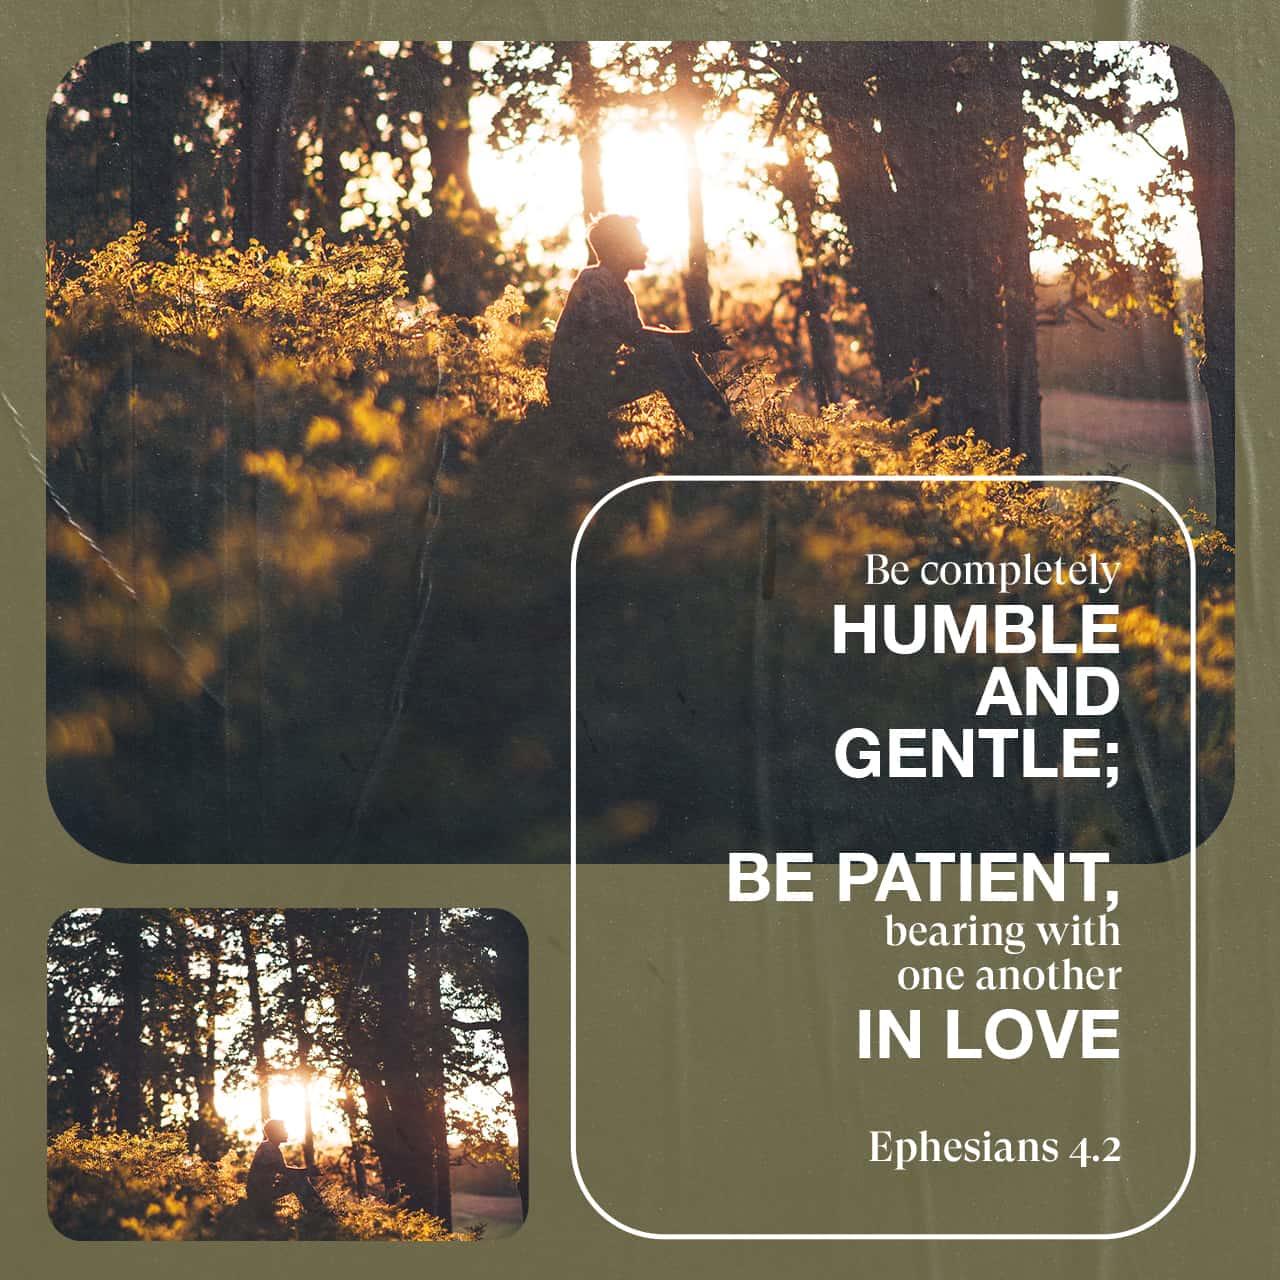 Bible Verse of the Day - day 148 - image 56519 (Ephesians 4:2-3)